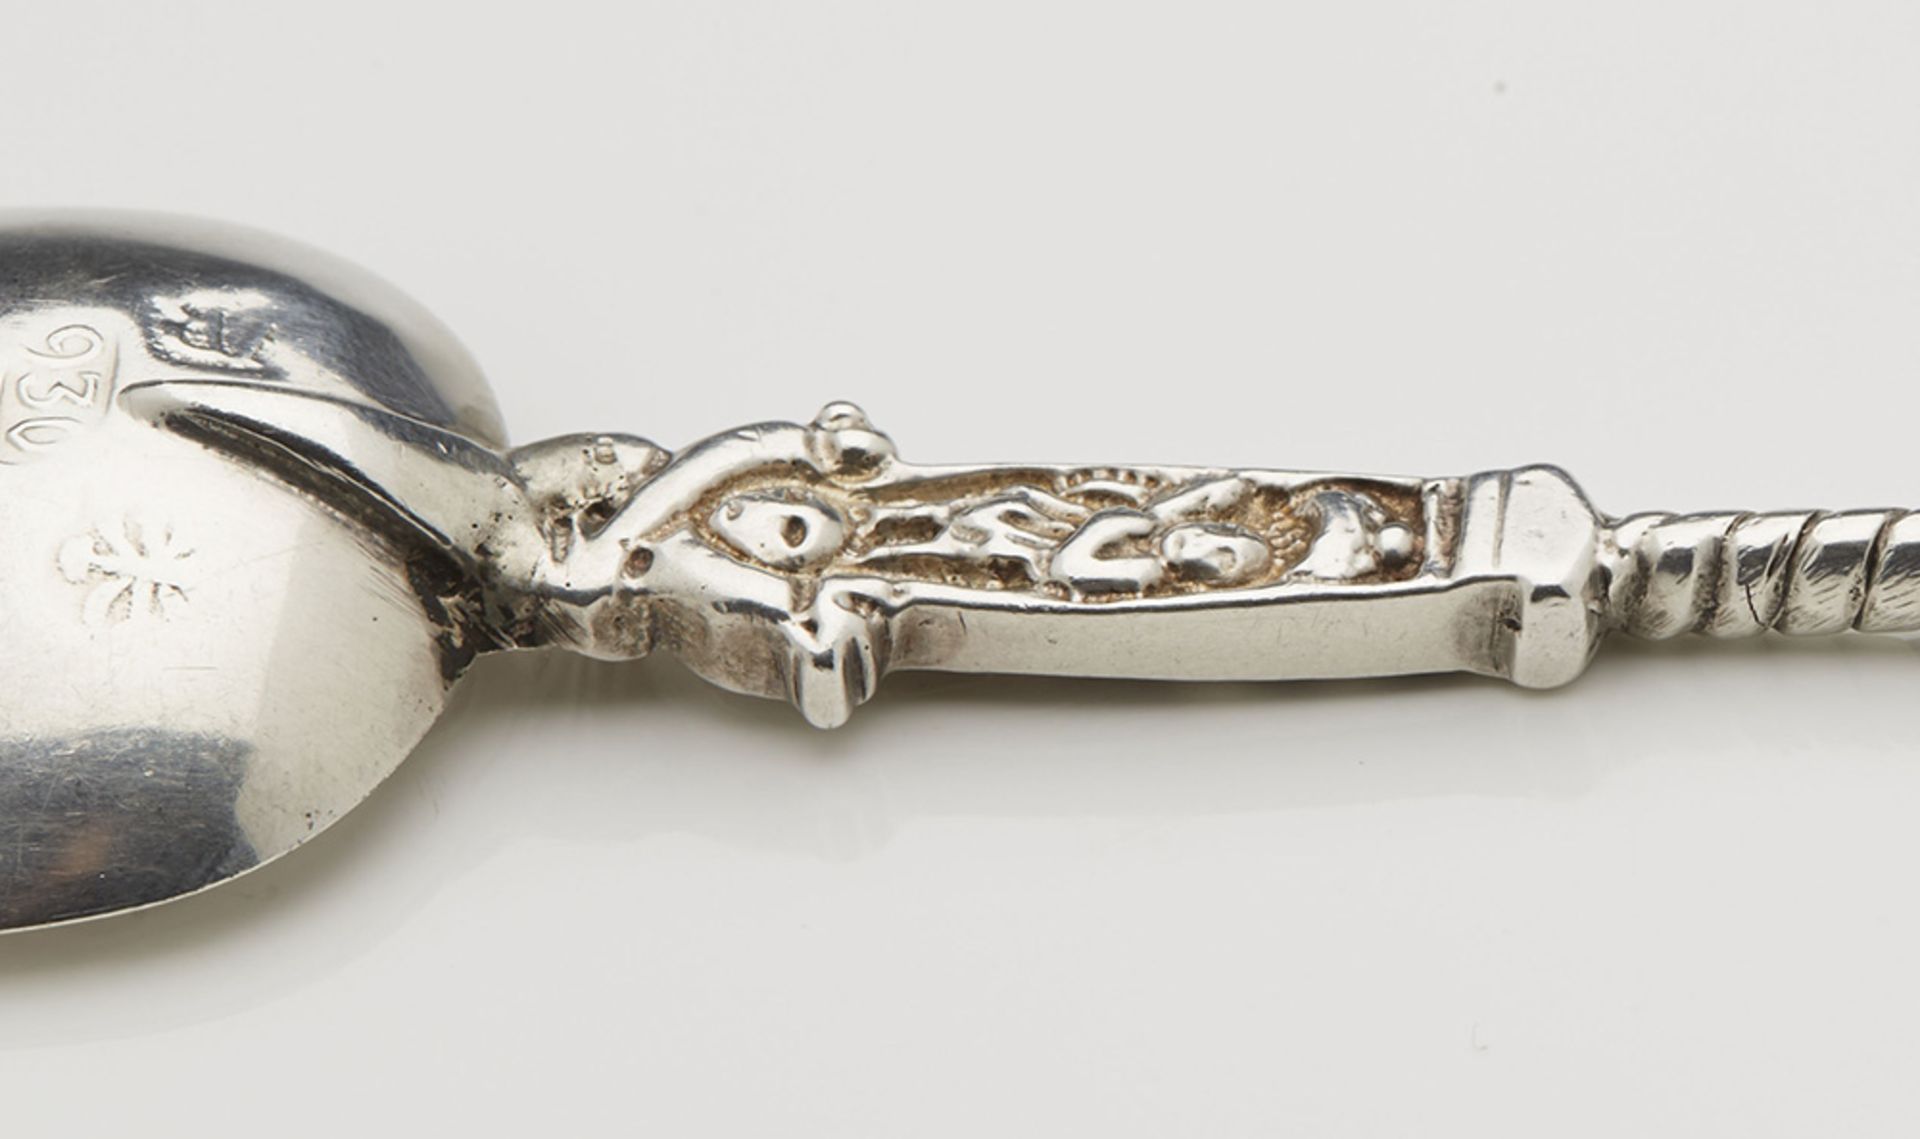 Fine Antique Dutch Silver Export Presentation Spoon With Figural Stem C.1890 - Image 6 of 6